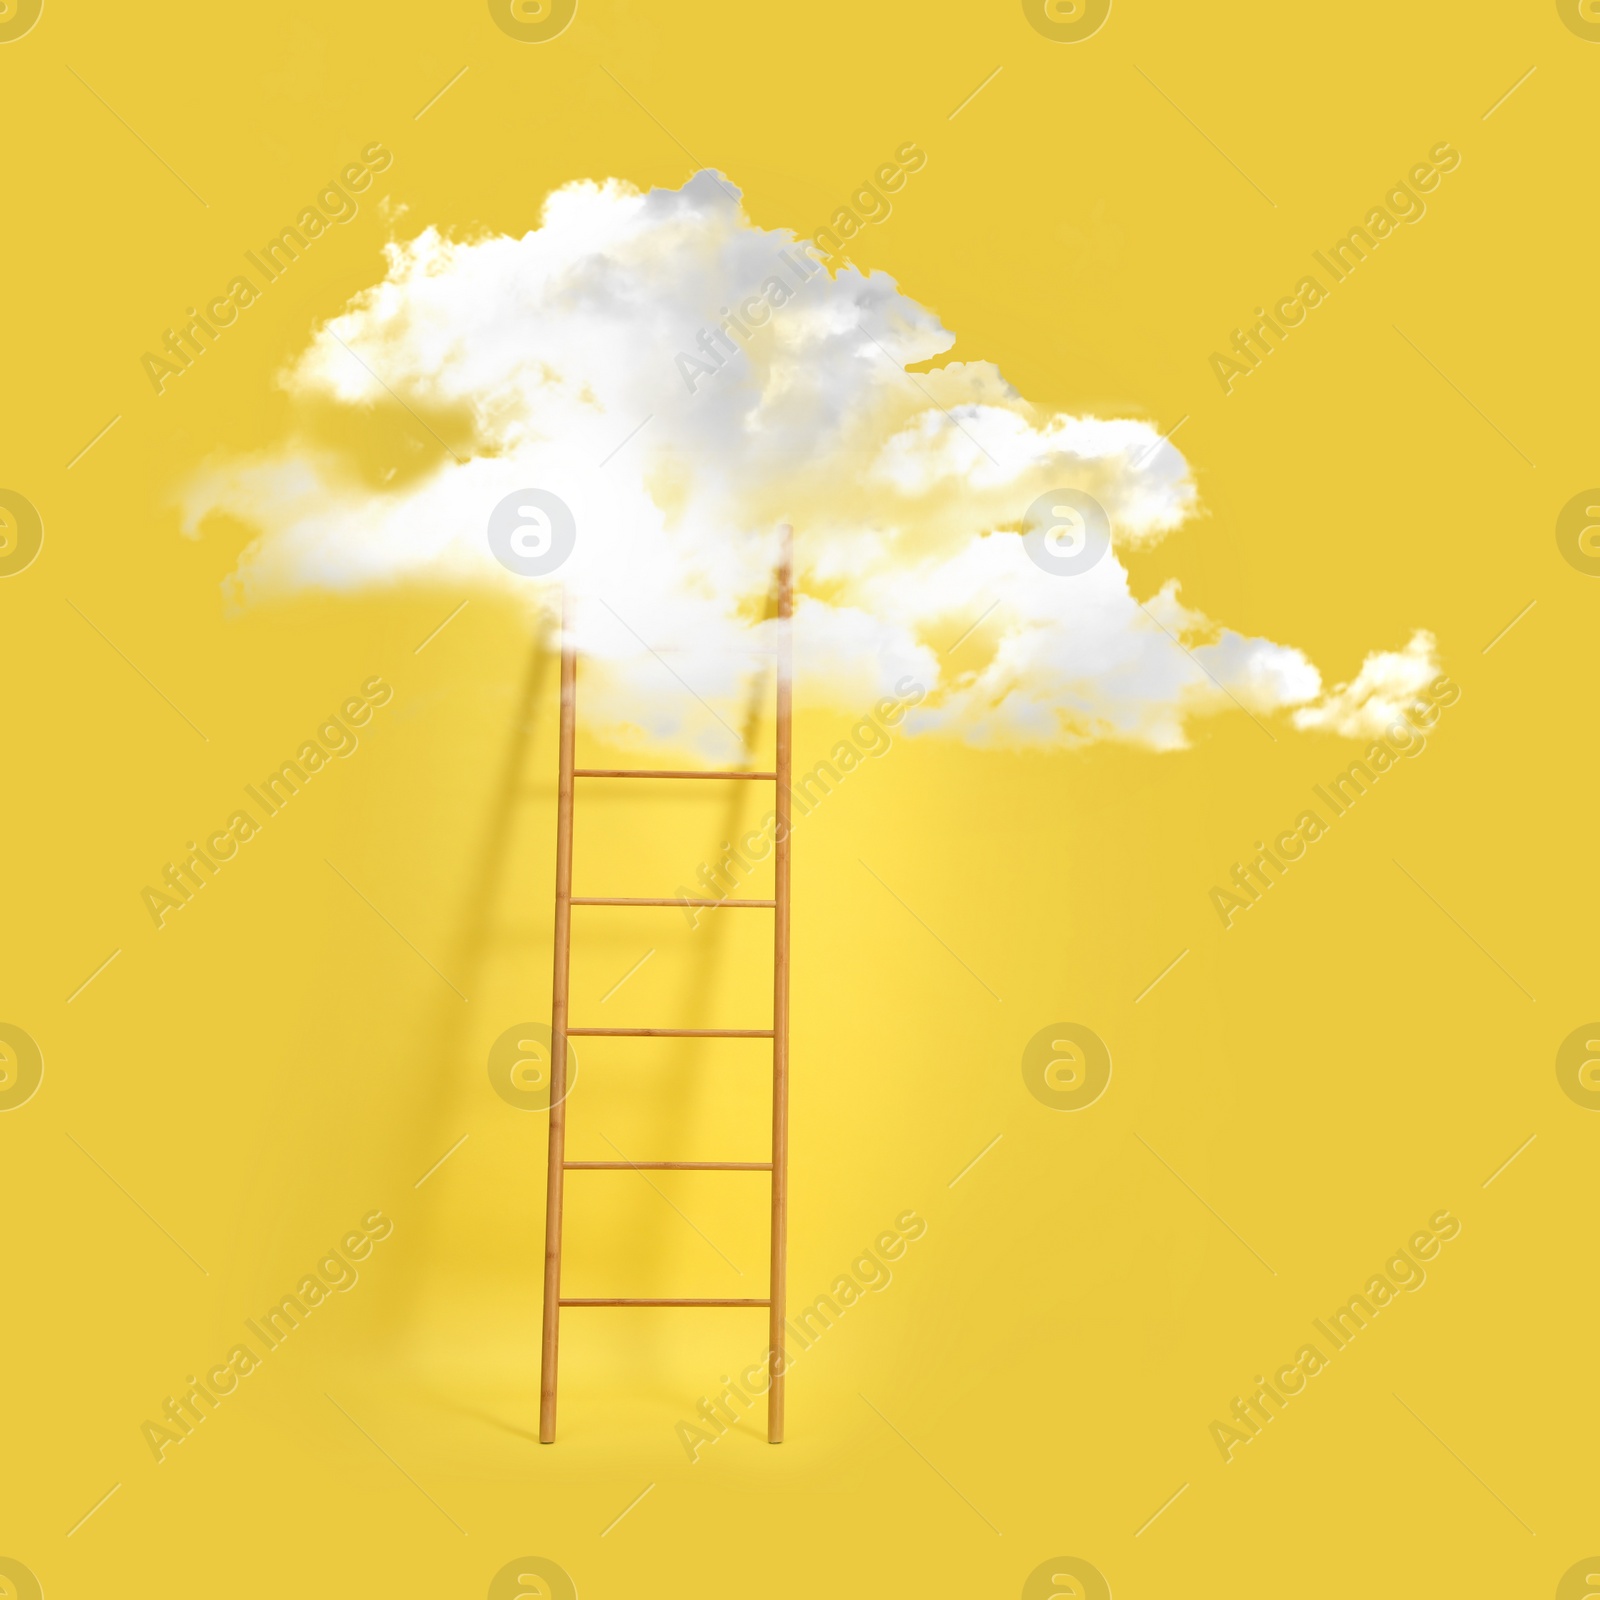 Image of Wooden ladder leading to white cloud on yellow background. Concept of growth and development